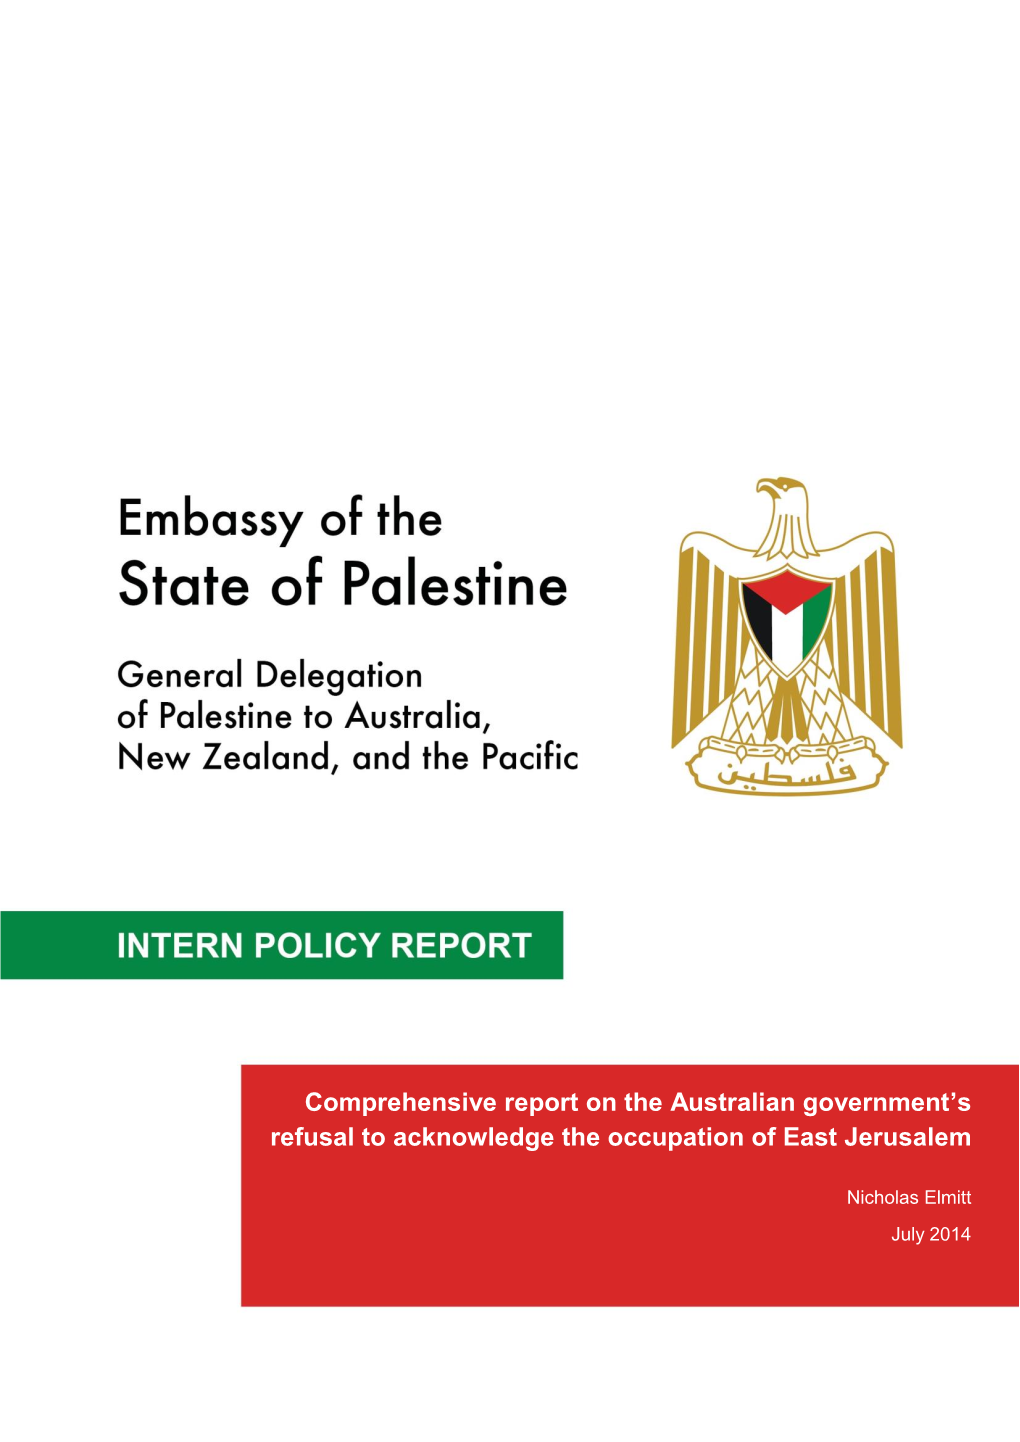 Comprehensive Report on the Australian Government’S Refusal to Acknowledge the Occupation of East Jerusalem